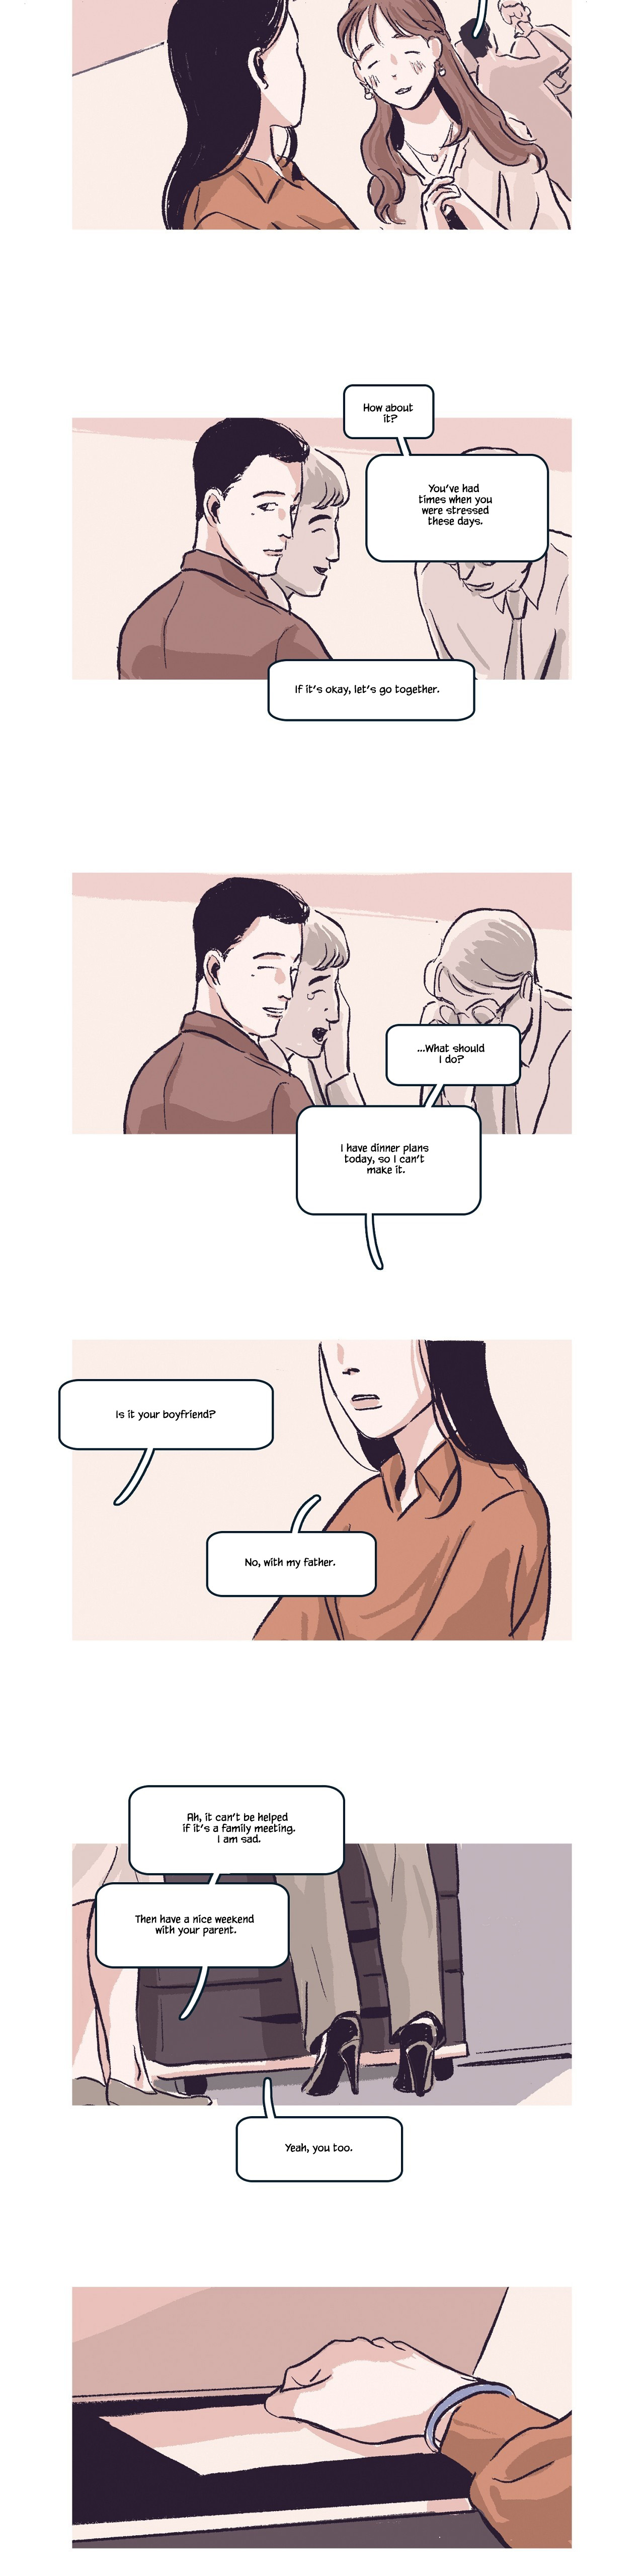 The Professor Who Reads Love Stories - Page 2